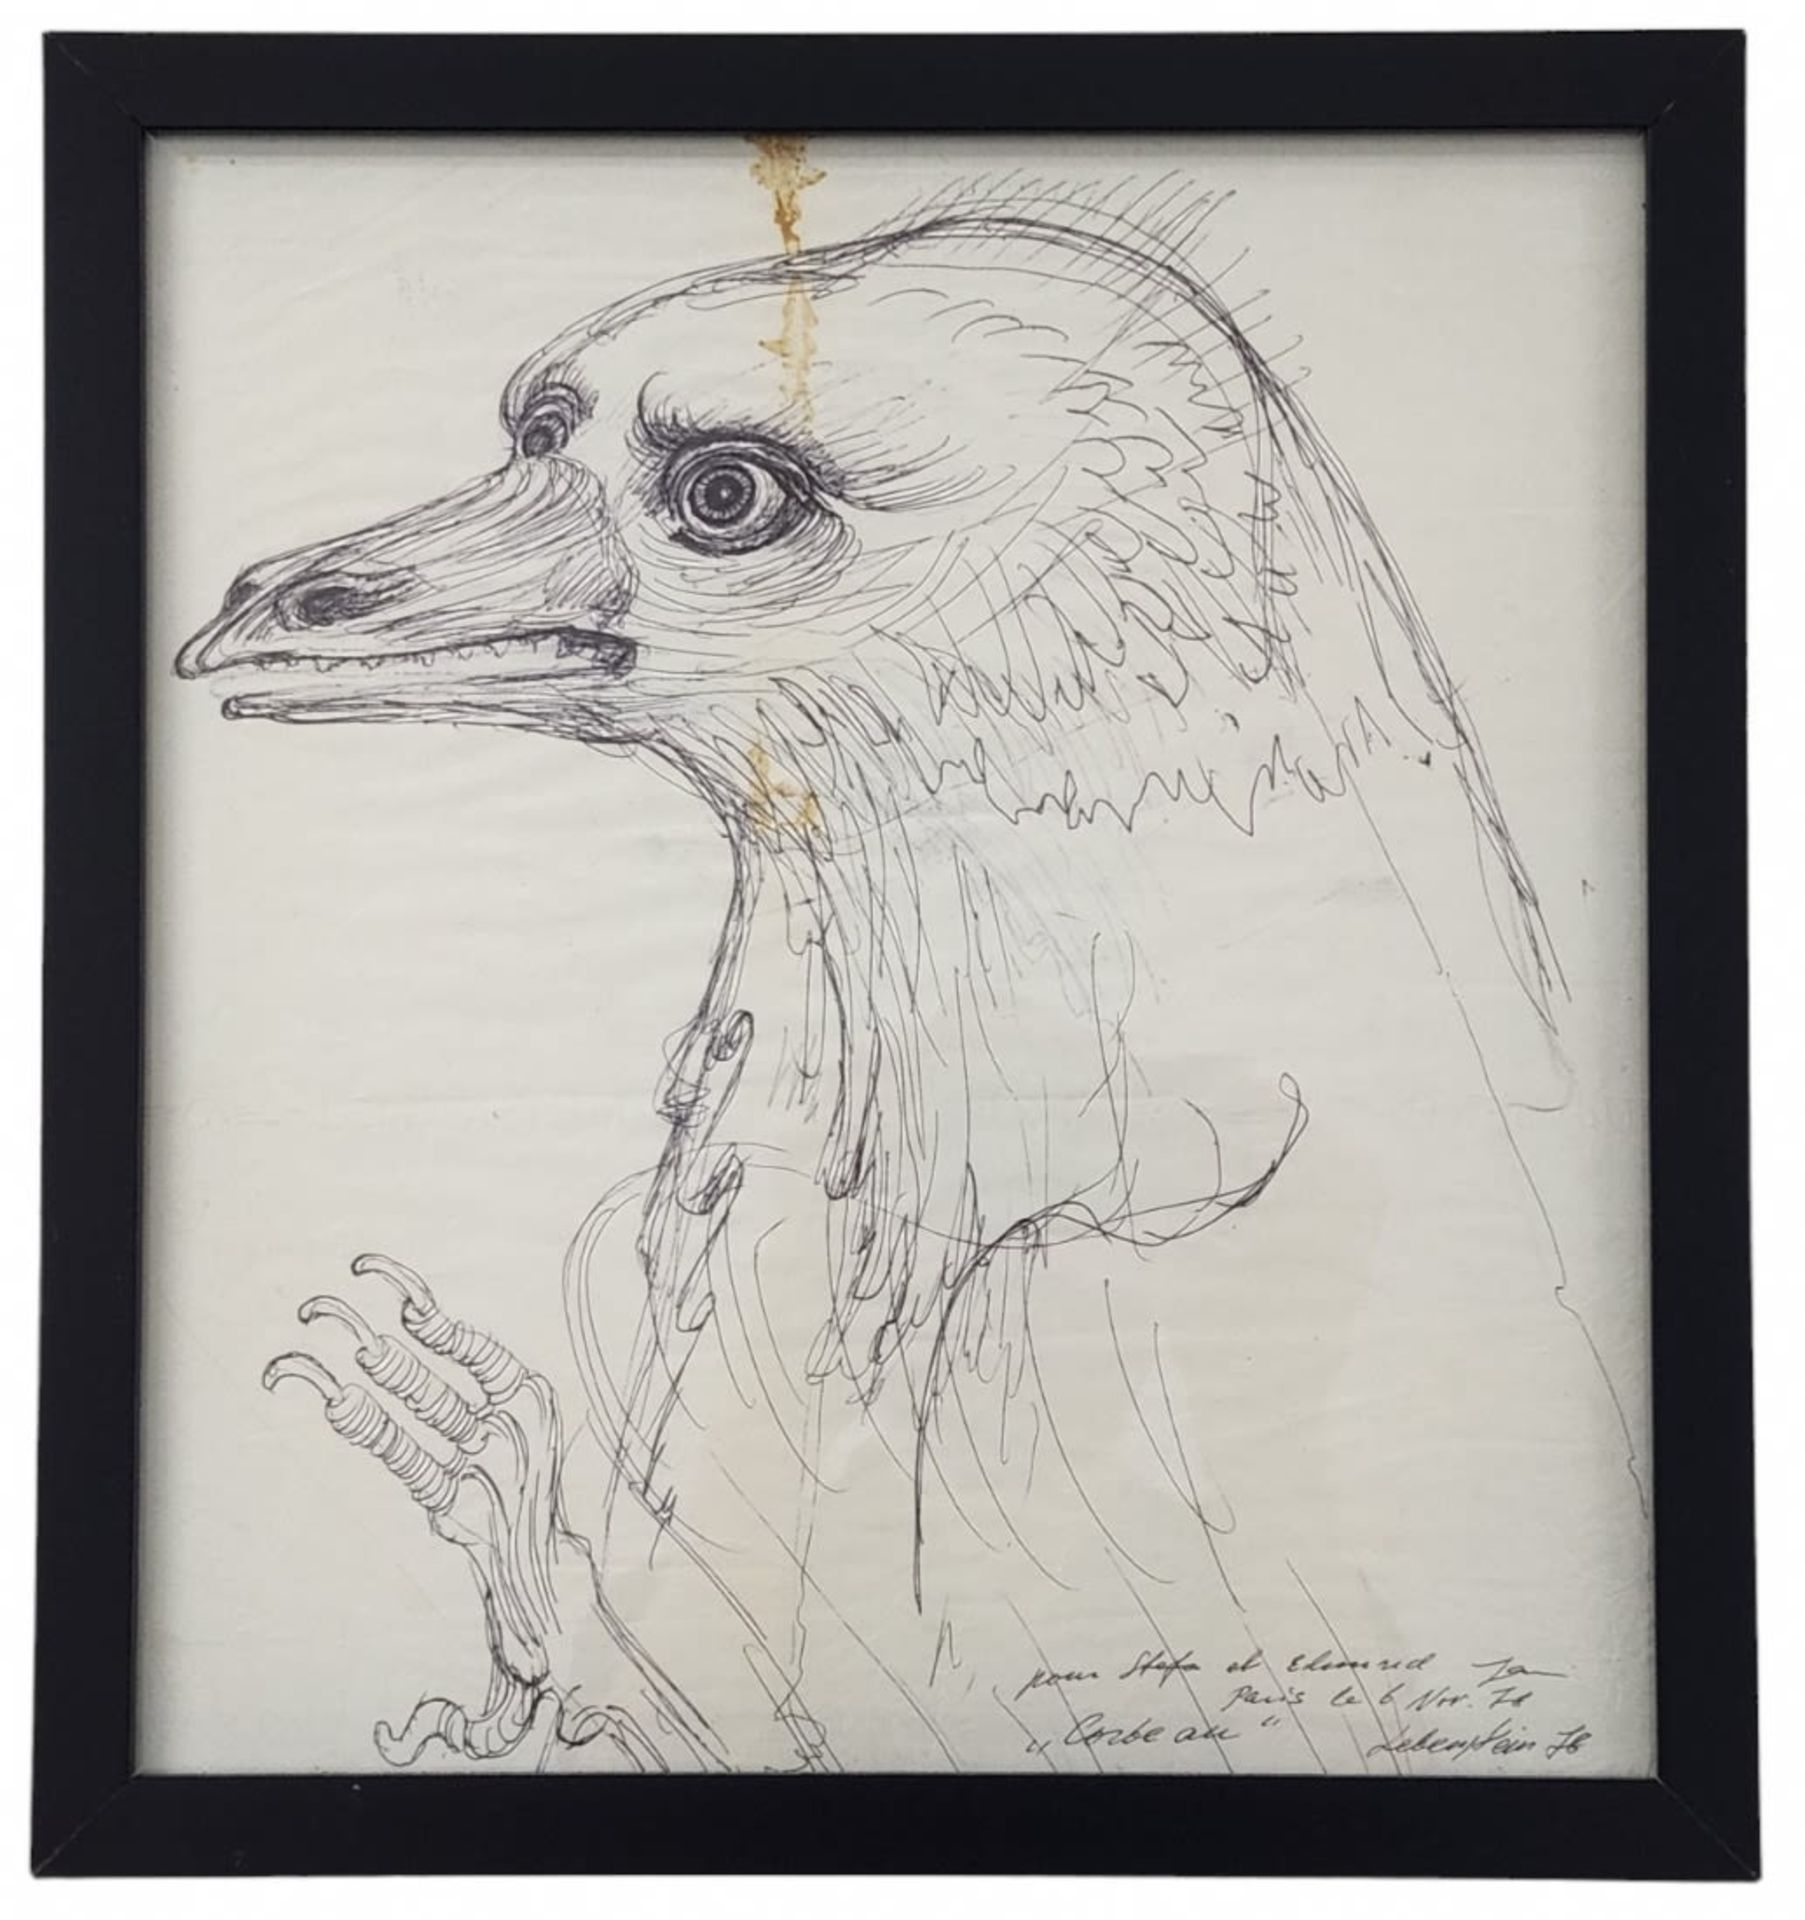 'Birds' - Jan Lebenstein , 1930-1999, drawing on paper, (two-sided drawing) signed and dated: - Image 2 of 4